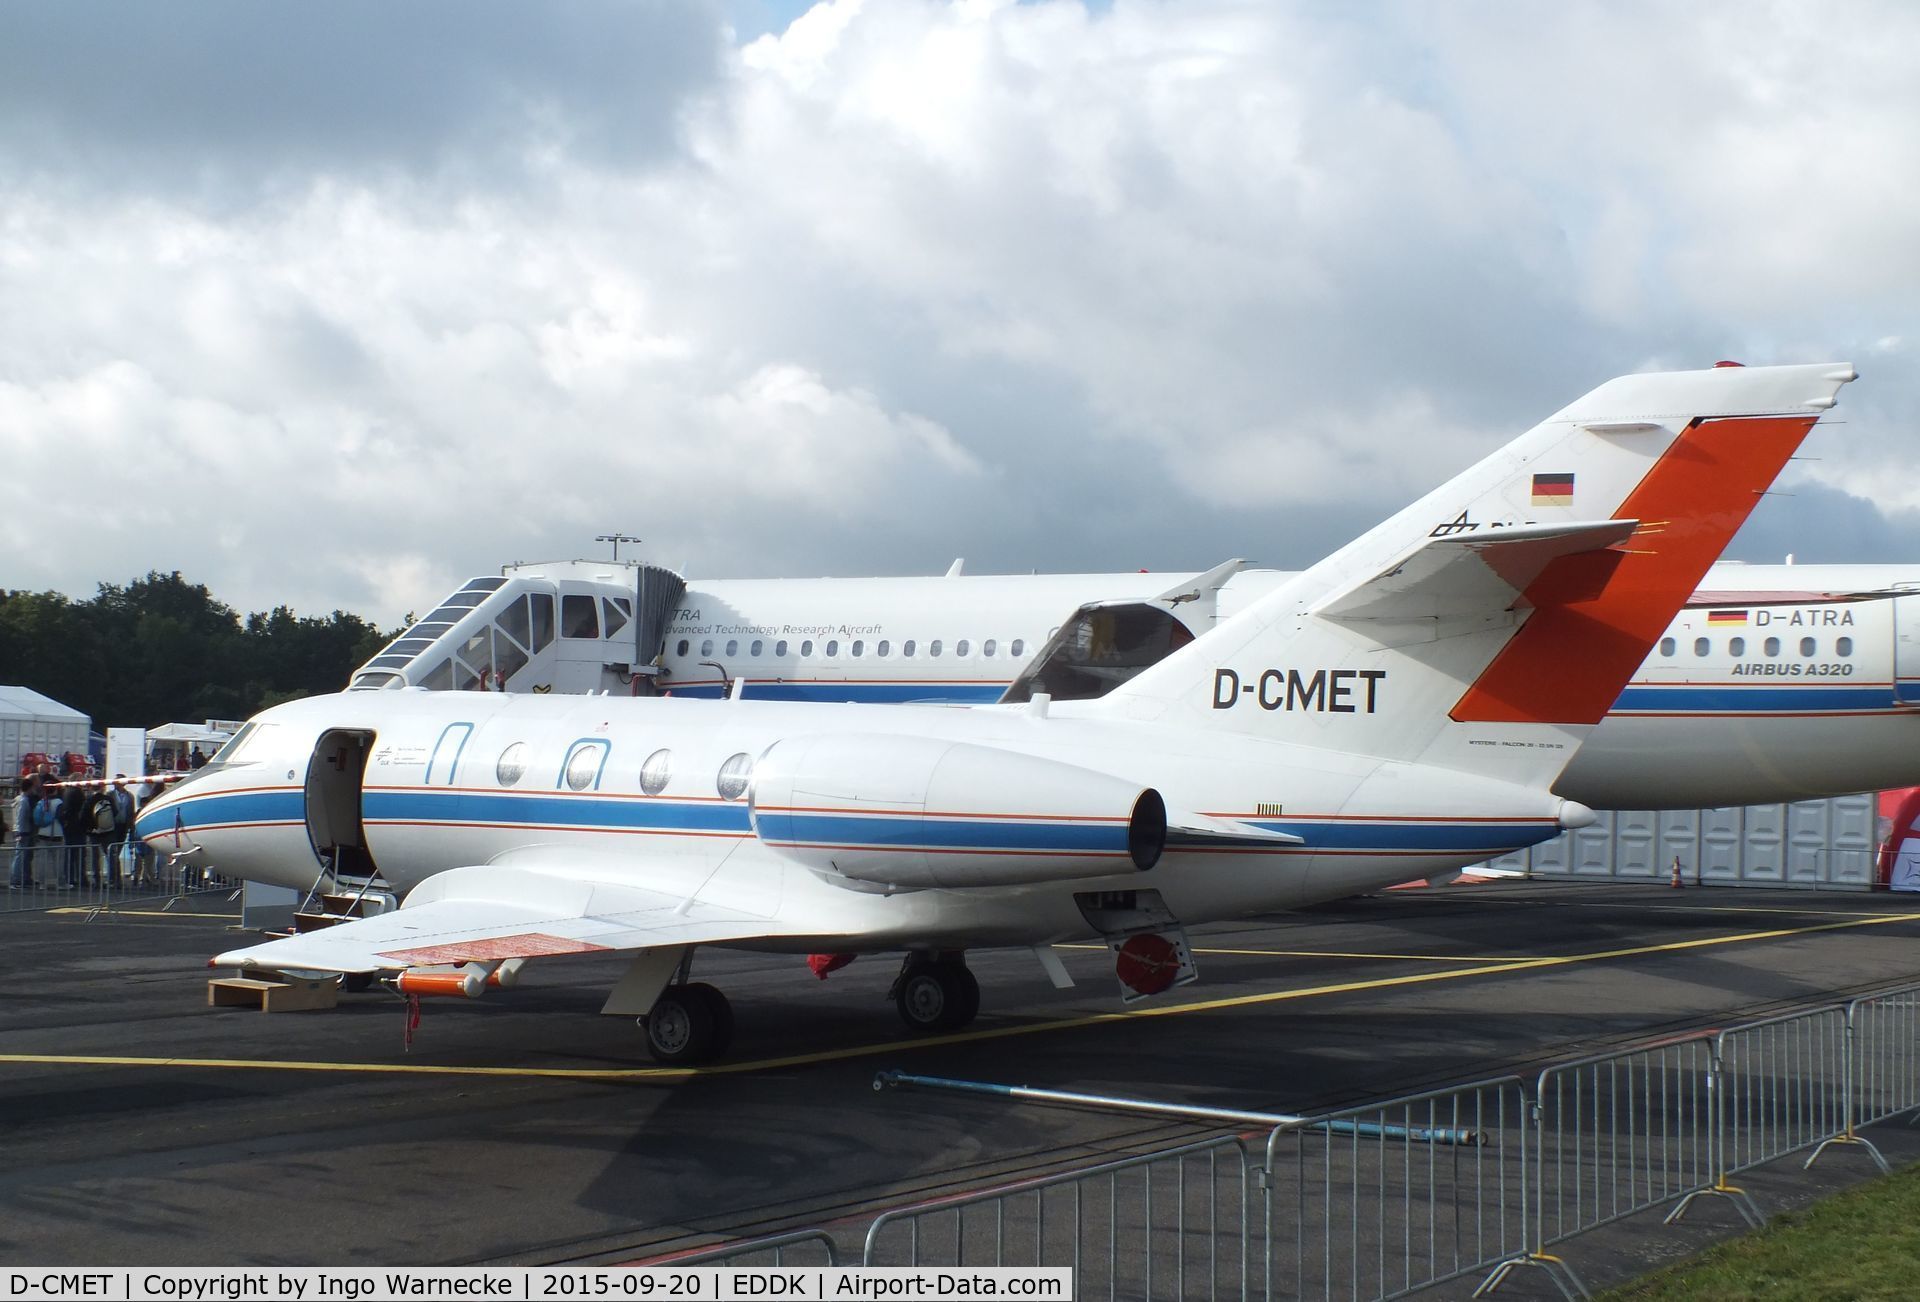 D-CMET, 1976 Dassault Falcon (Mystere) 20E-5 C/N 329, Dassault Falcon 20E-5 research aircraft of DLR at the DLR 2015 air and space day on the side of Cologne airport